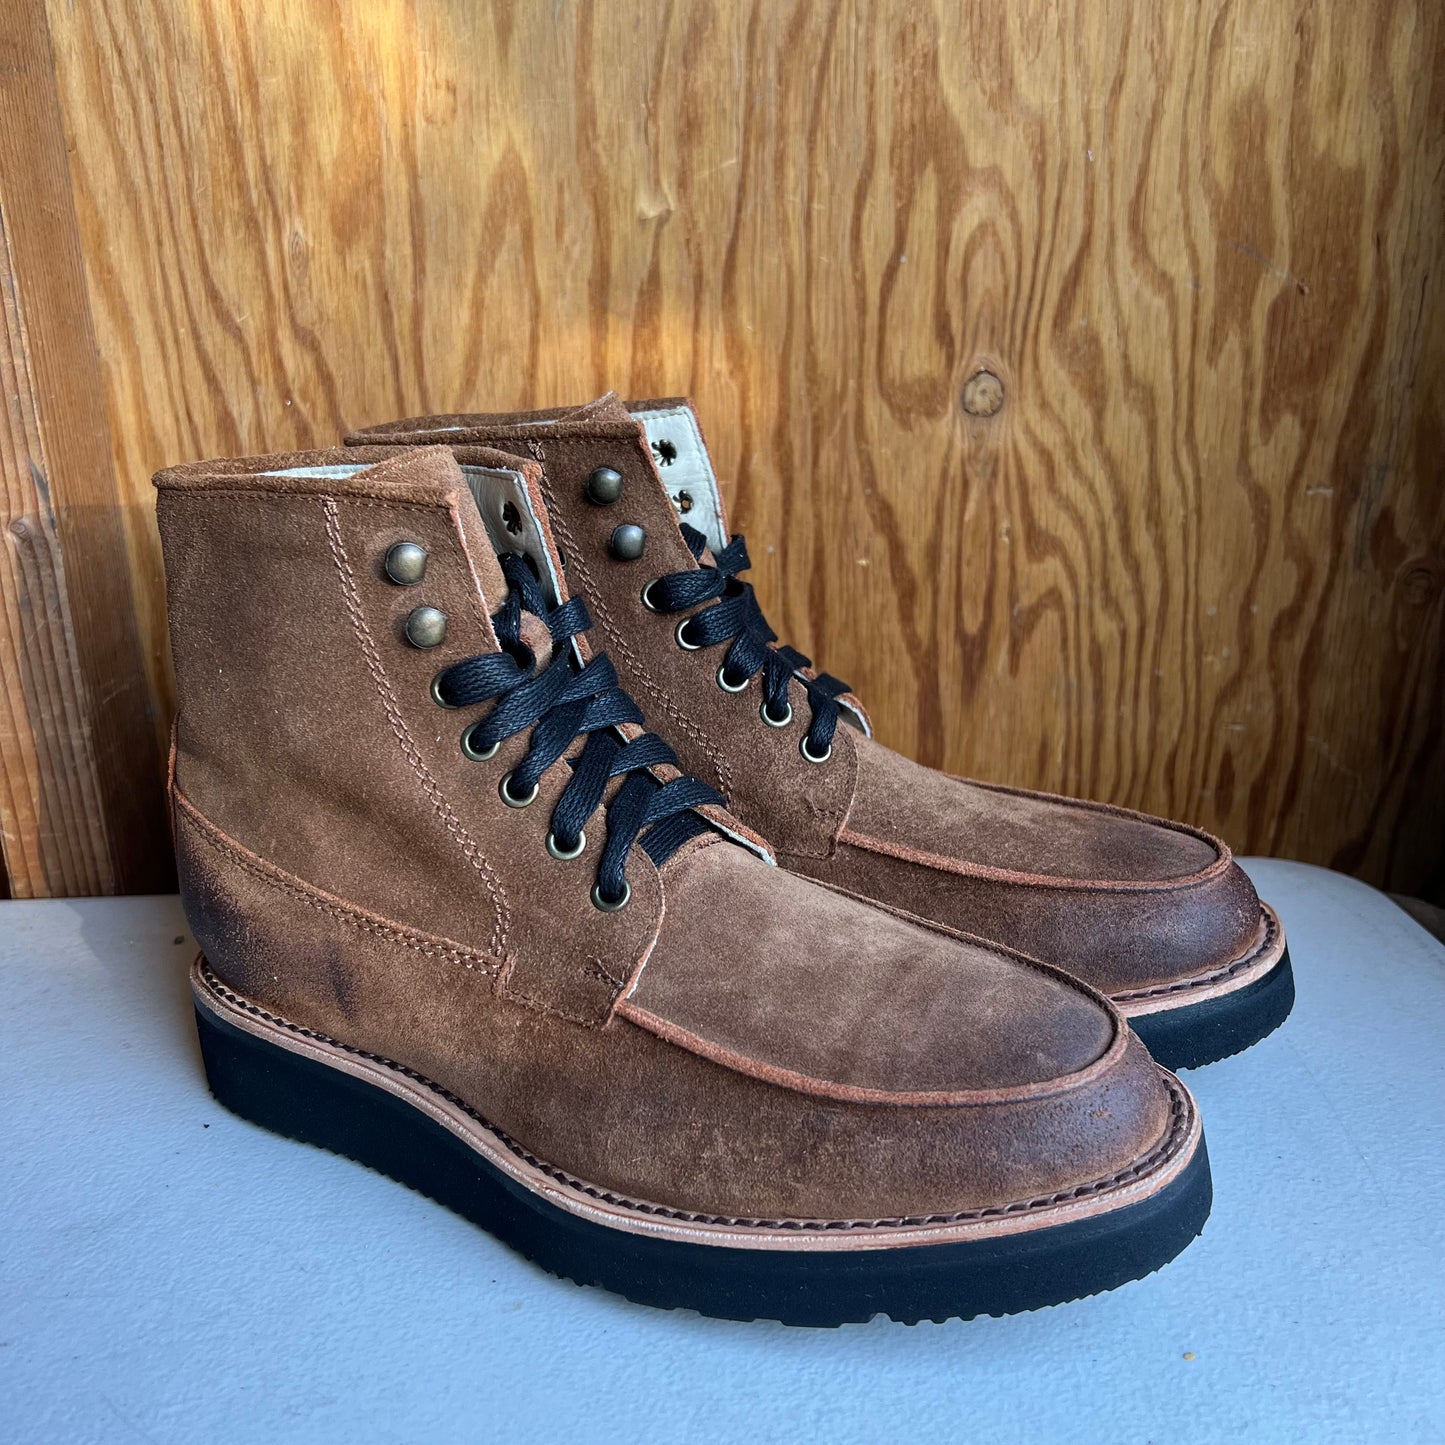 Nomad - Waxed Cognac Suede Size 7.5